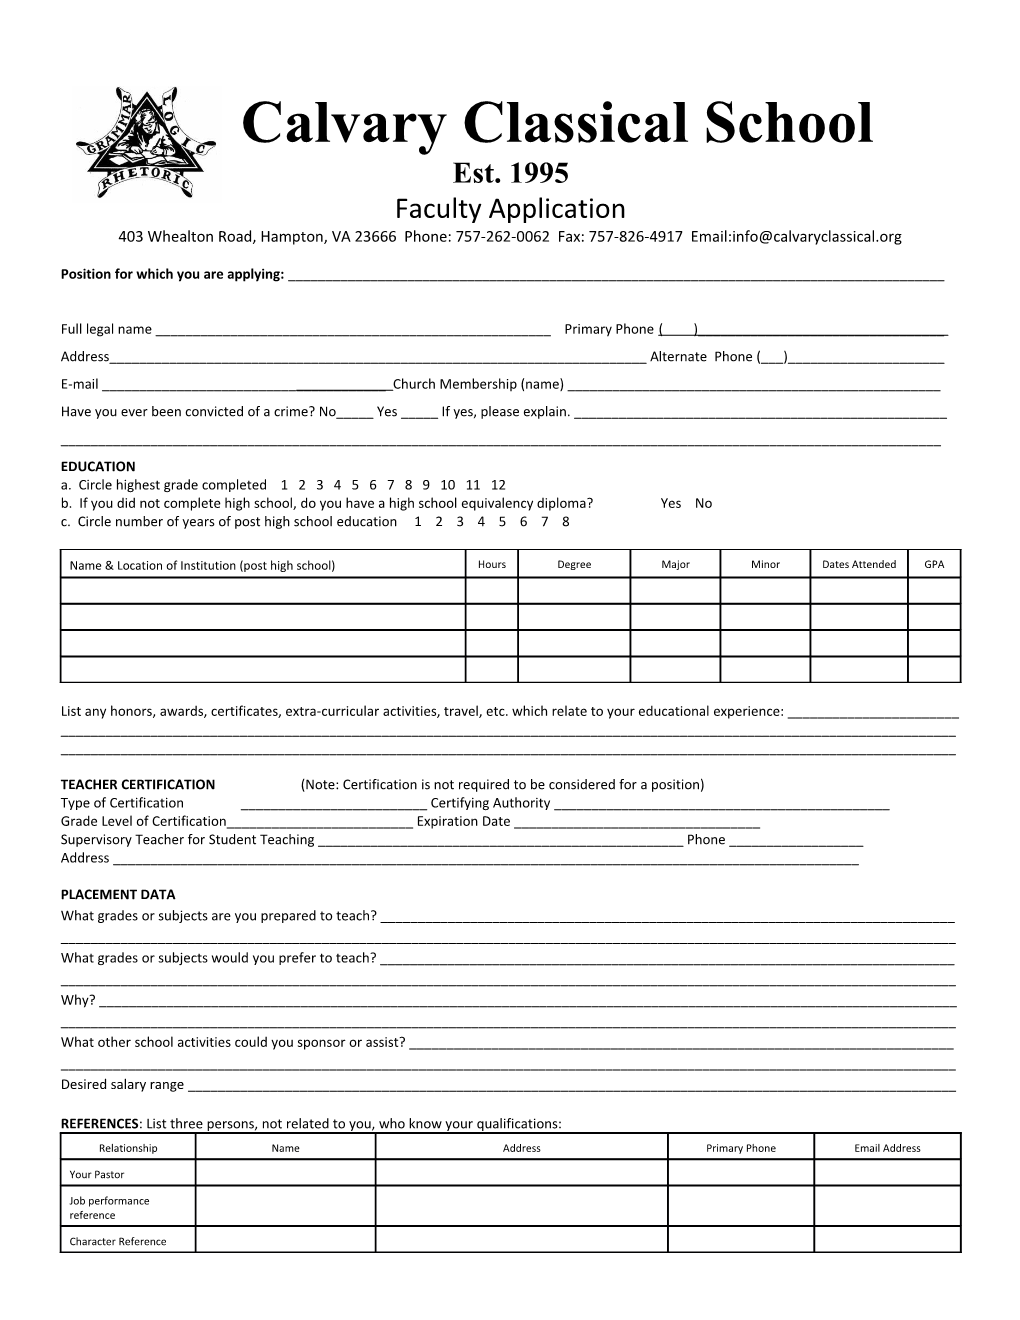 FACULTY APPLICATION (Version 11/2005)